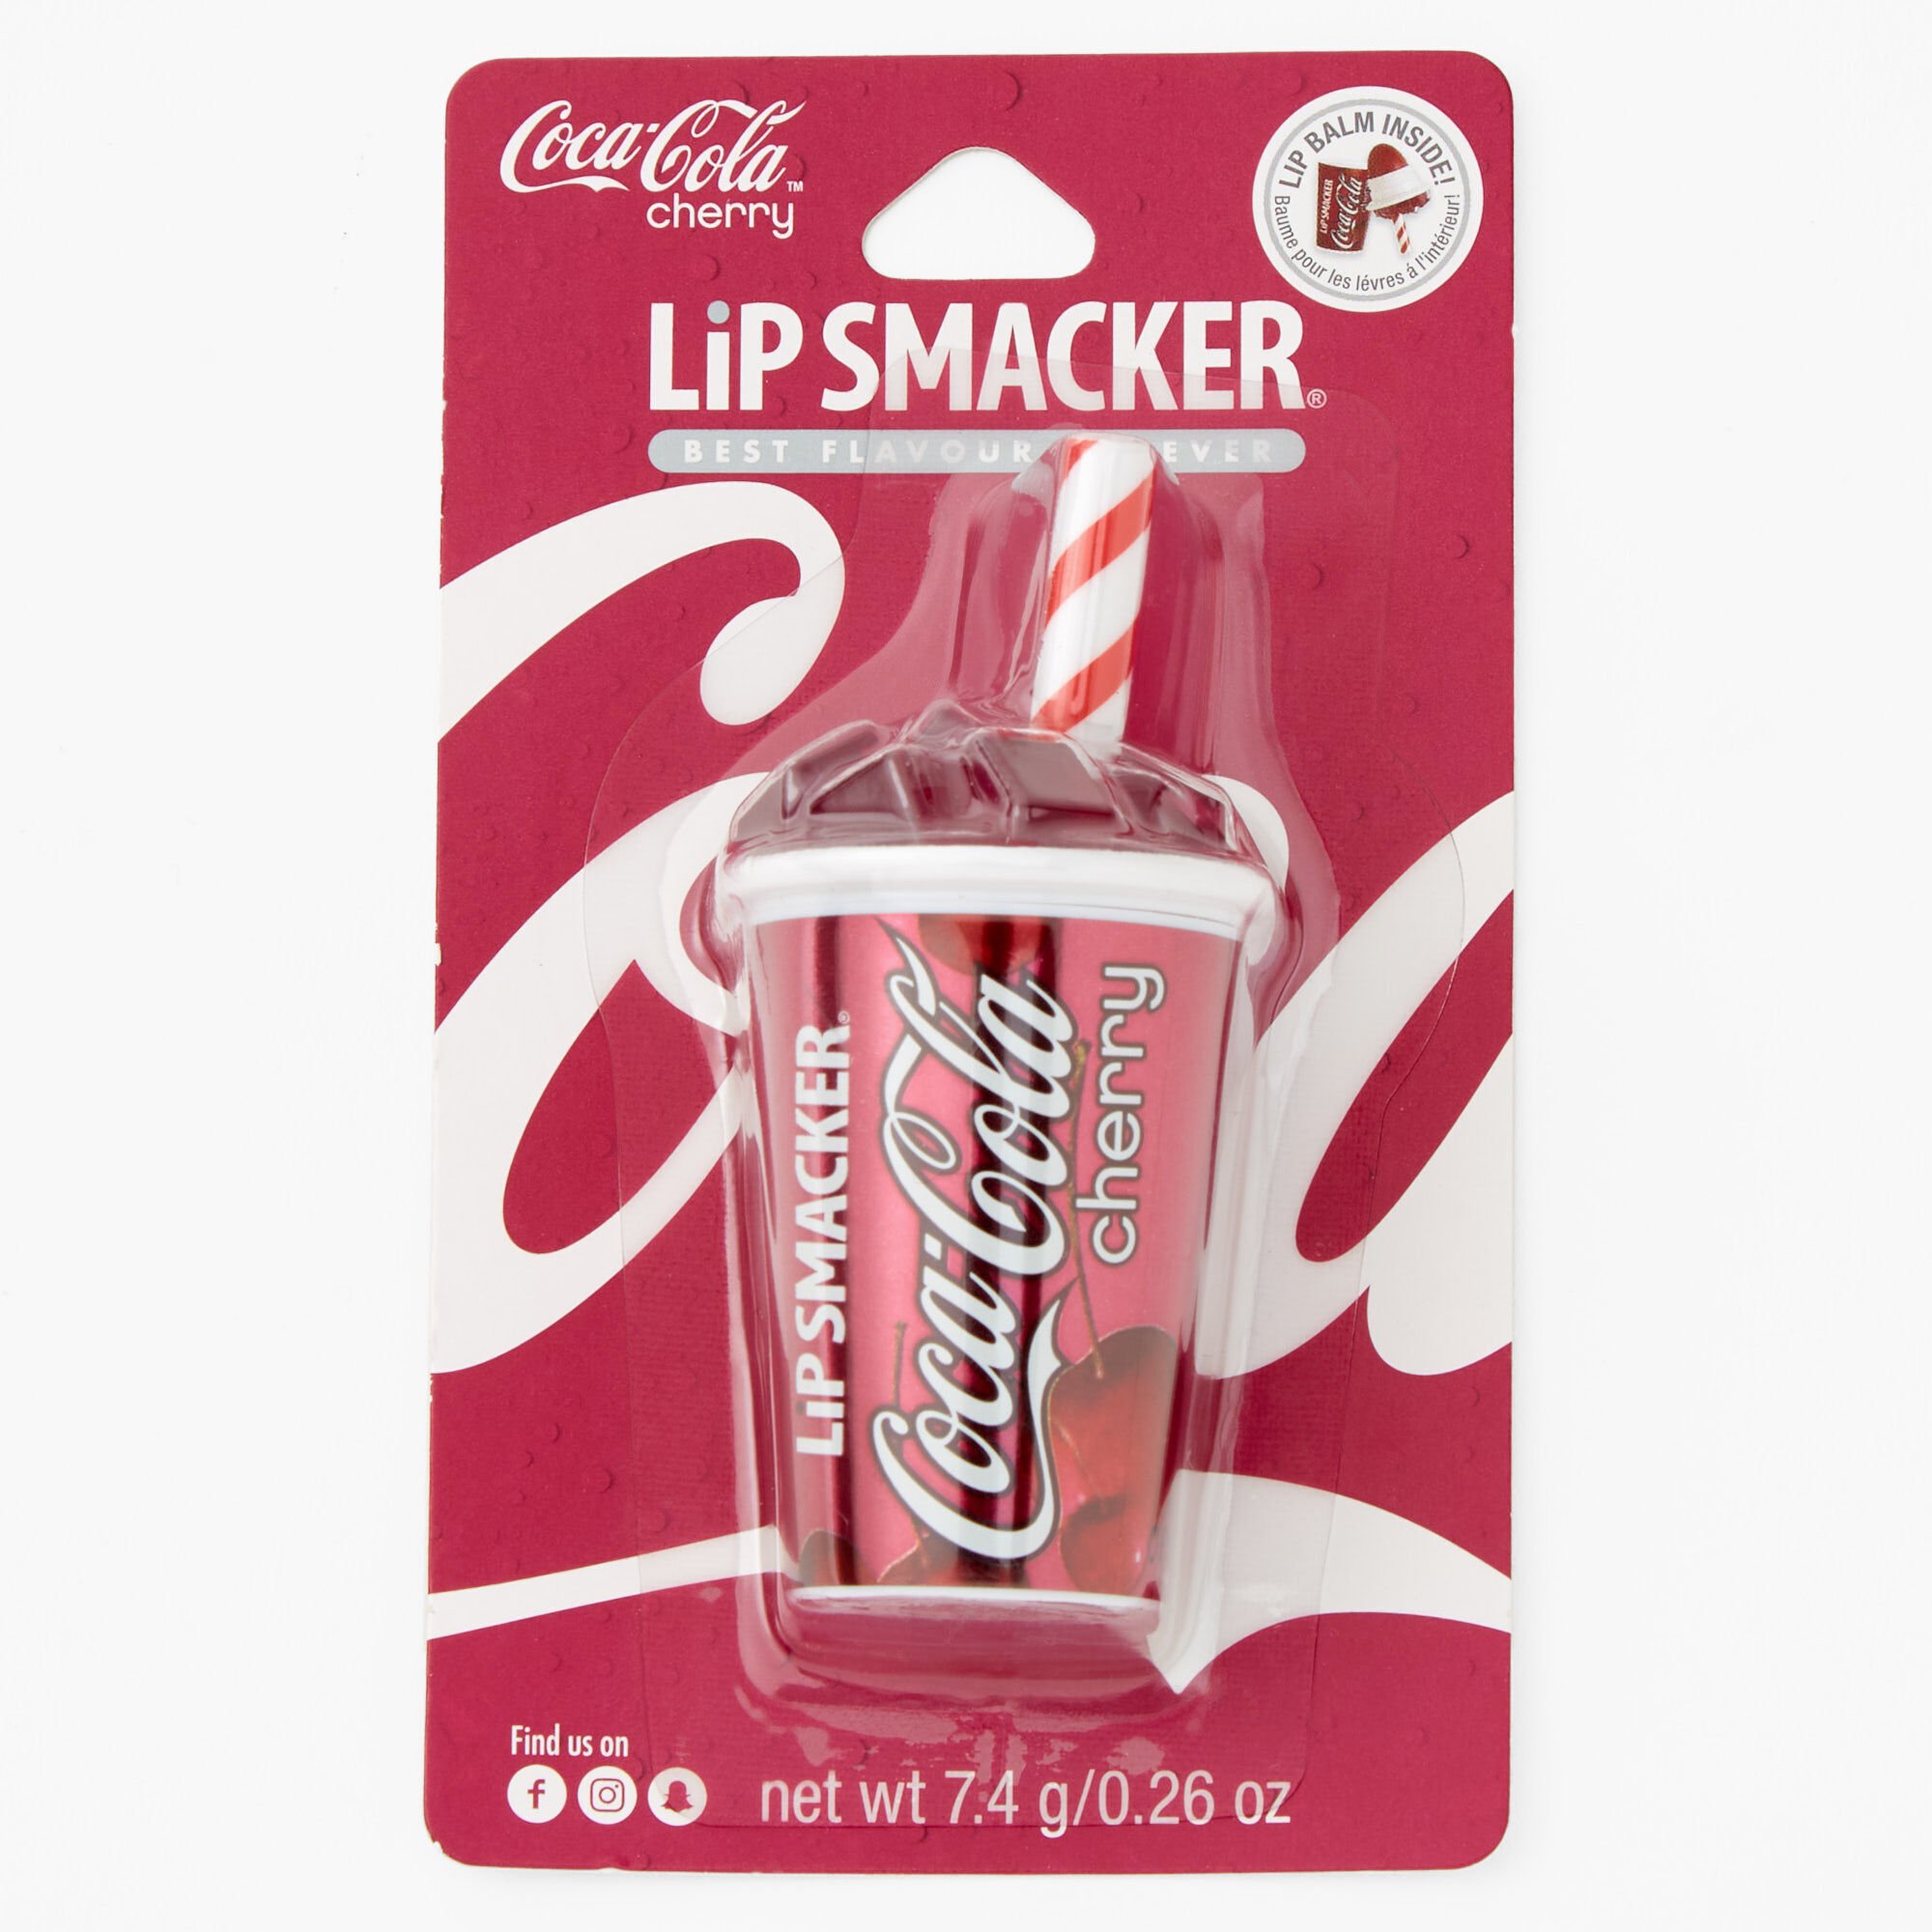 View Claires Lip Smacker CocaCola Cherry Cup Balm information